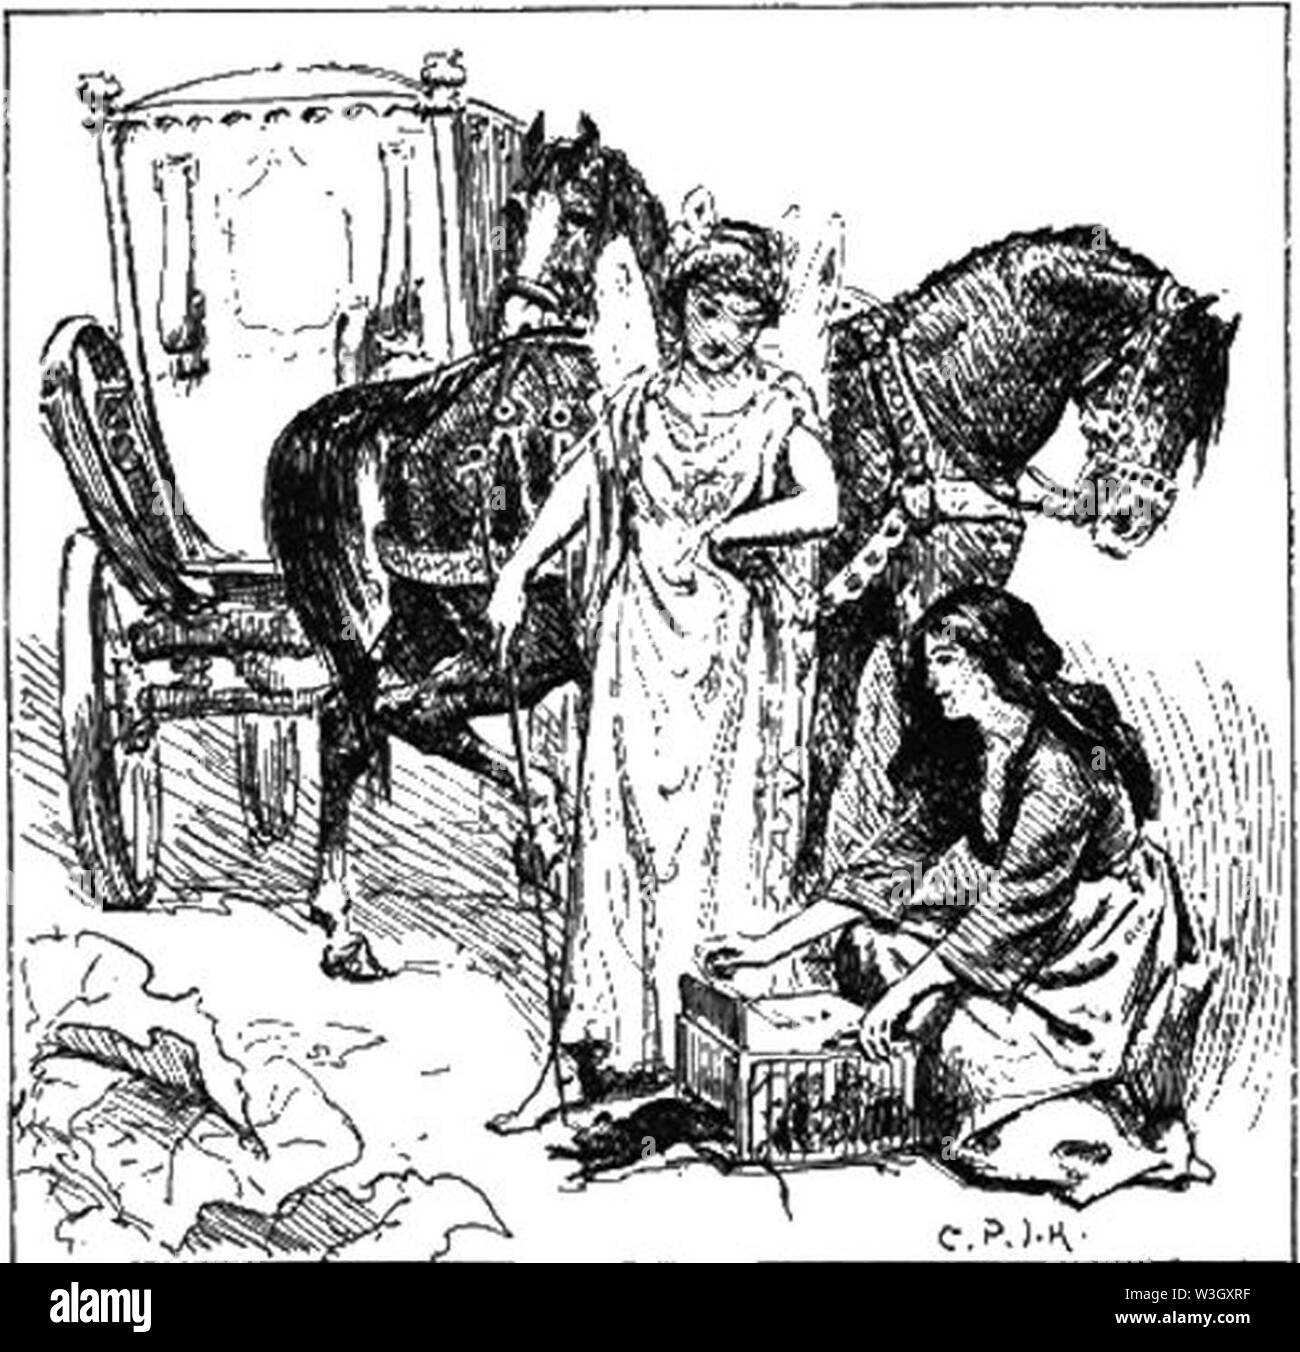 Cinderella 2 from The Blue Fairy Book 1889 author Andrew Lang. Stock Photo